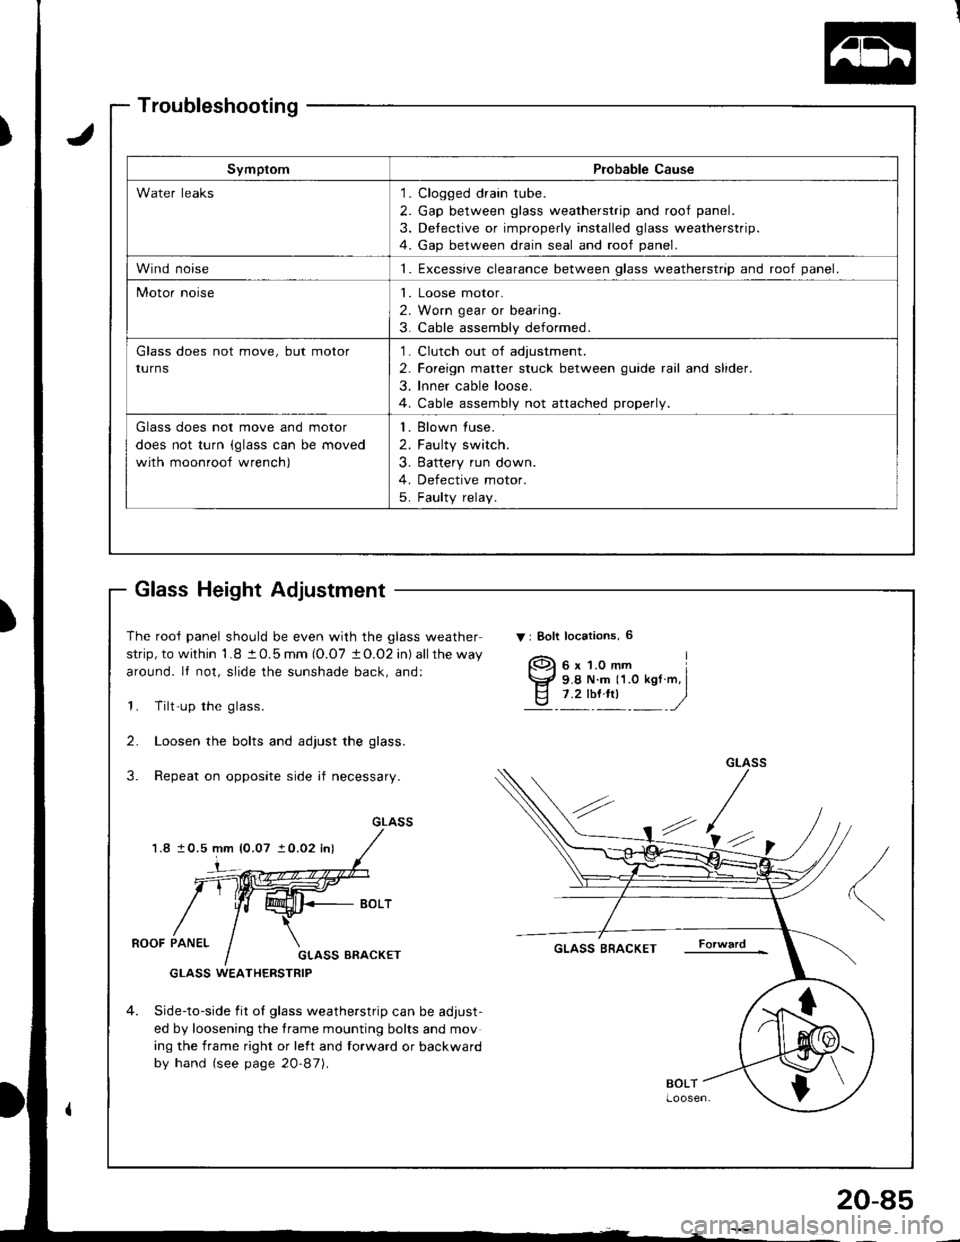 HONDA INTEGRA 1998 4.G Workshop Manual )
Troubleshooting
Glass Height Adjustment
The rooJ panel should be even with the glass weather
strip, to within 1.8 t 0.5 mm (O.O7 tO.O2 in) allthe way
around. It not, slide the sunshade back, and:
1.